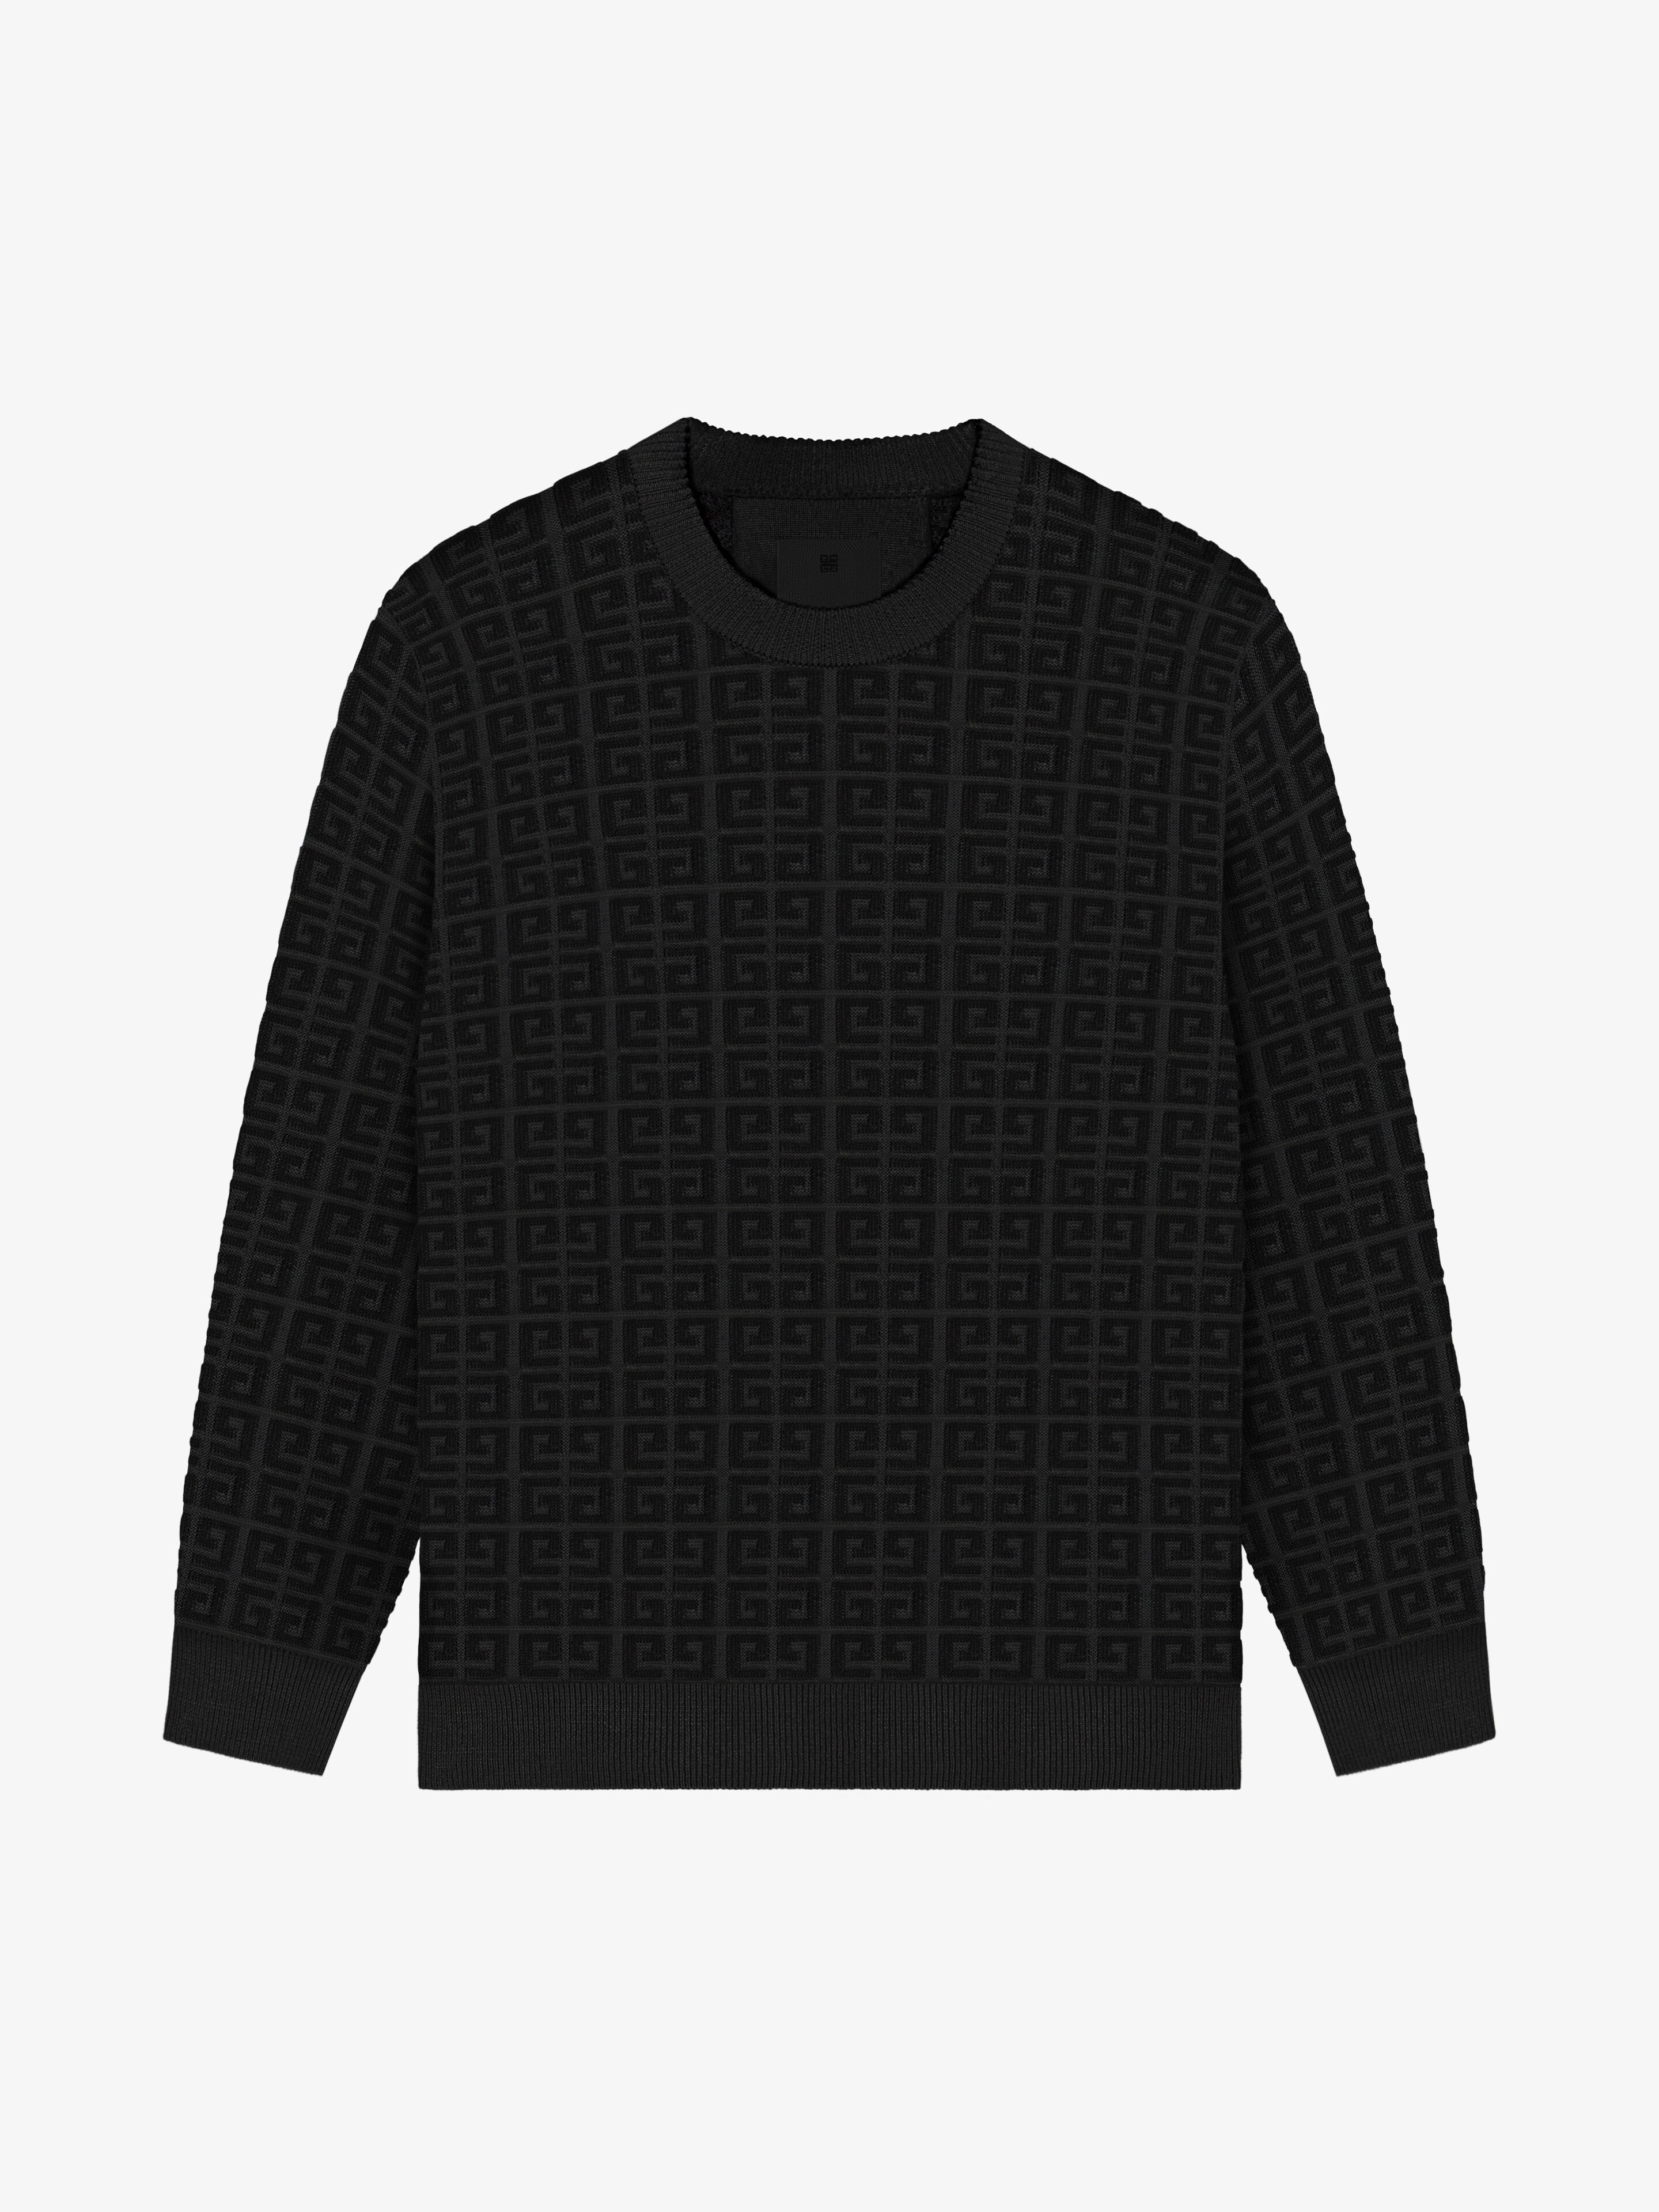 Givenchy sweater L for Sale in New York, NY - OfferUp